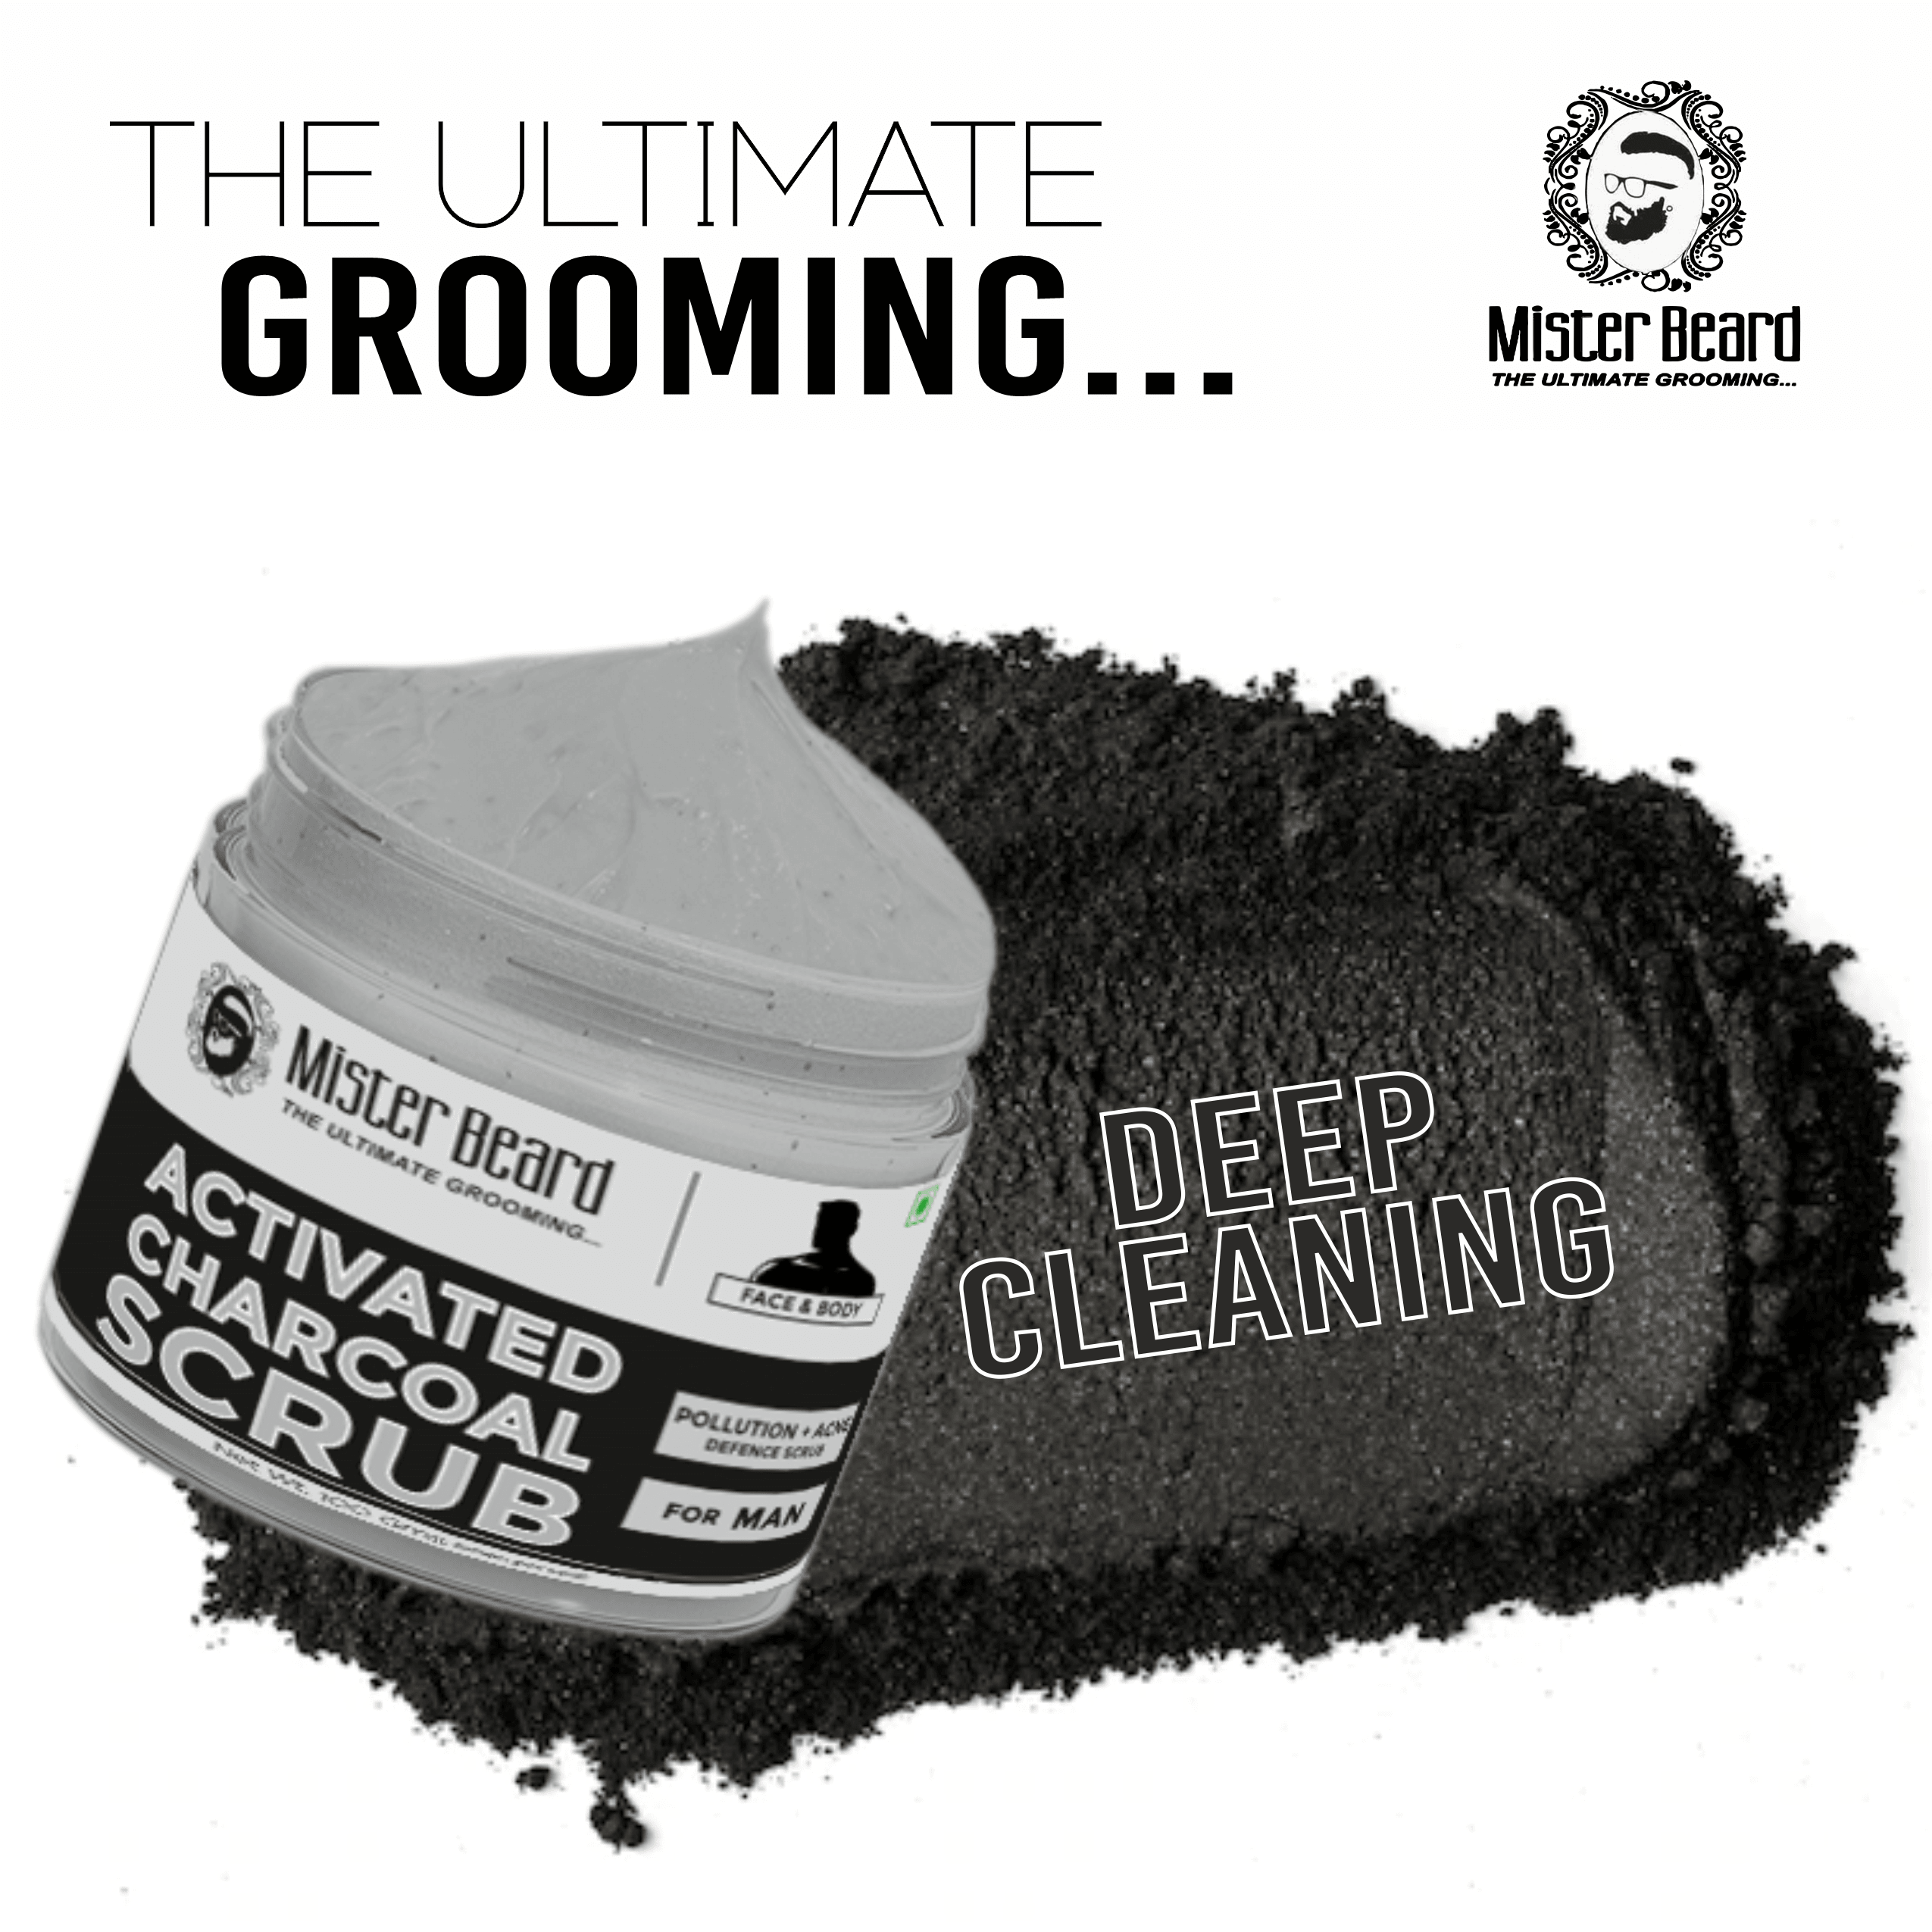 Mister Beard Activated Charcoal Scrub 100gm|For Deep Exfoliation | Dead Skin Remover | Tan Removal | Blackhead Remover Scrub - Pink Root